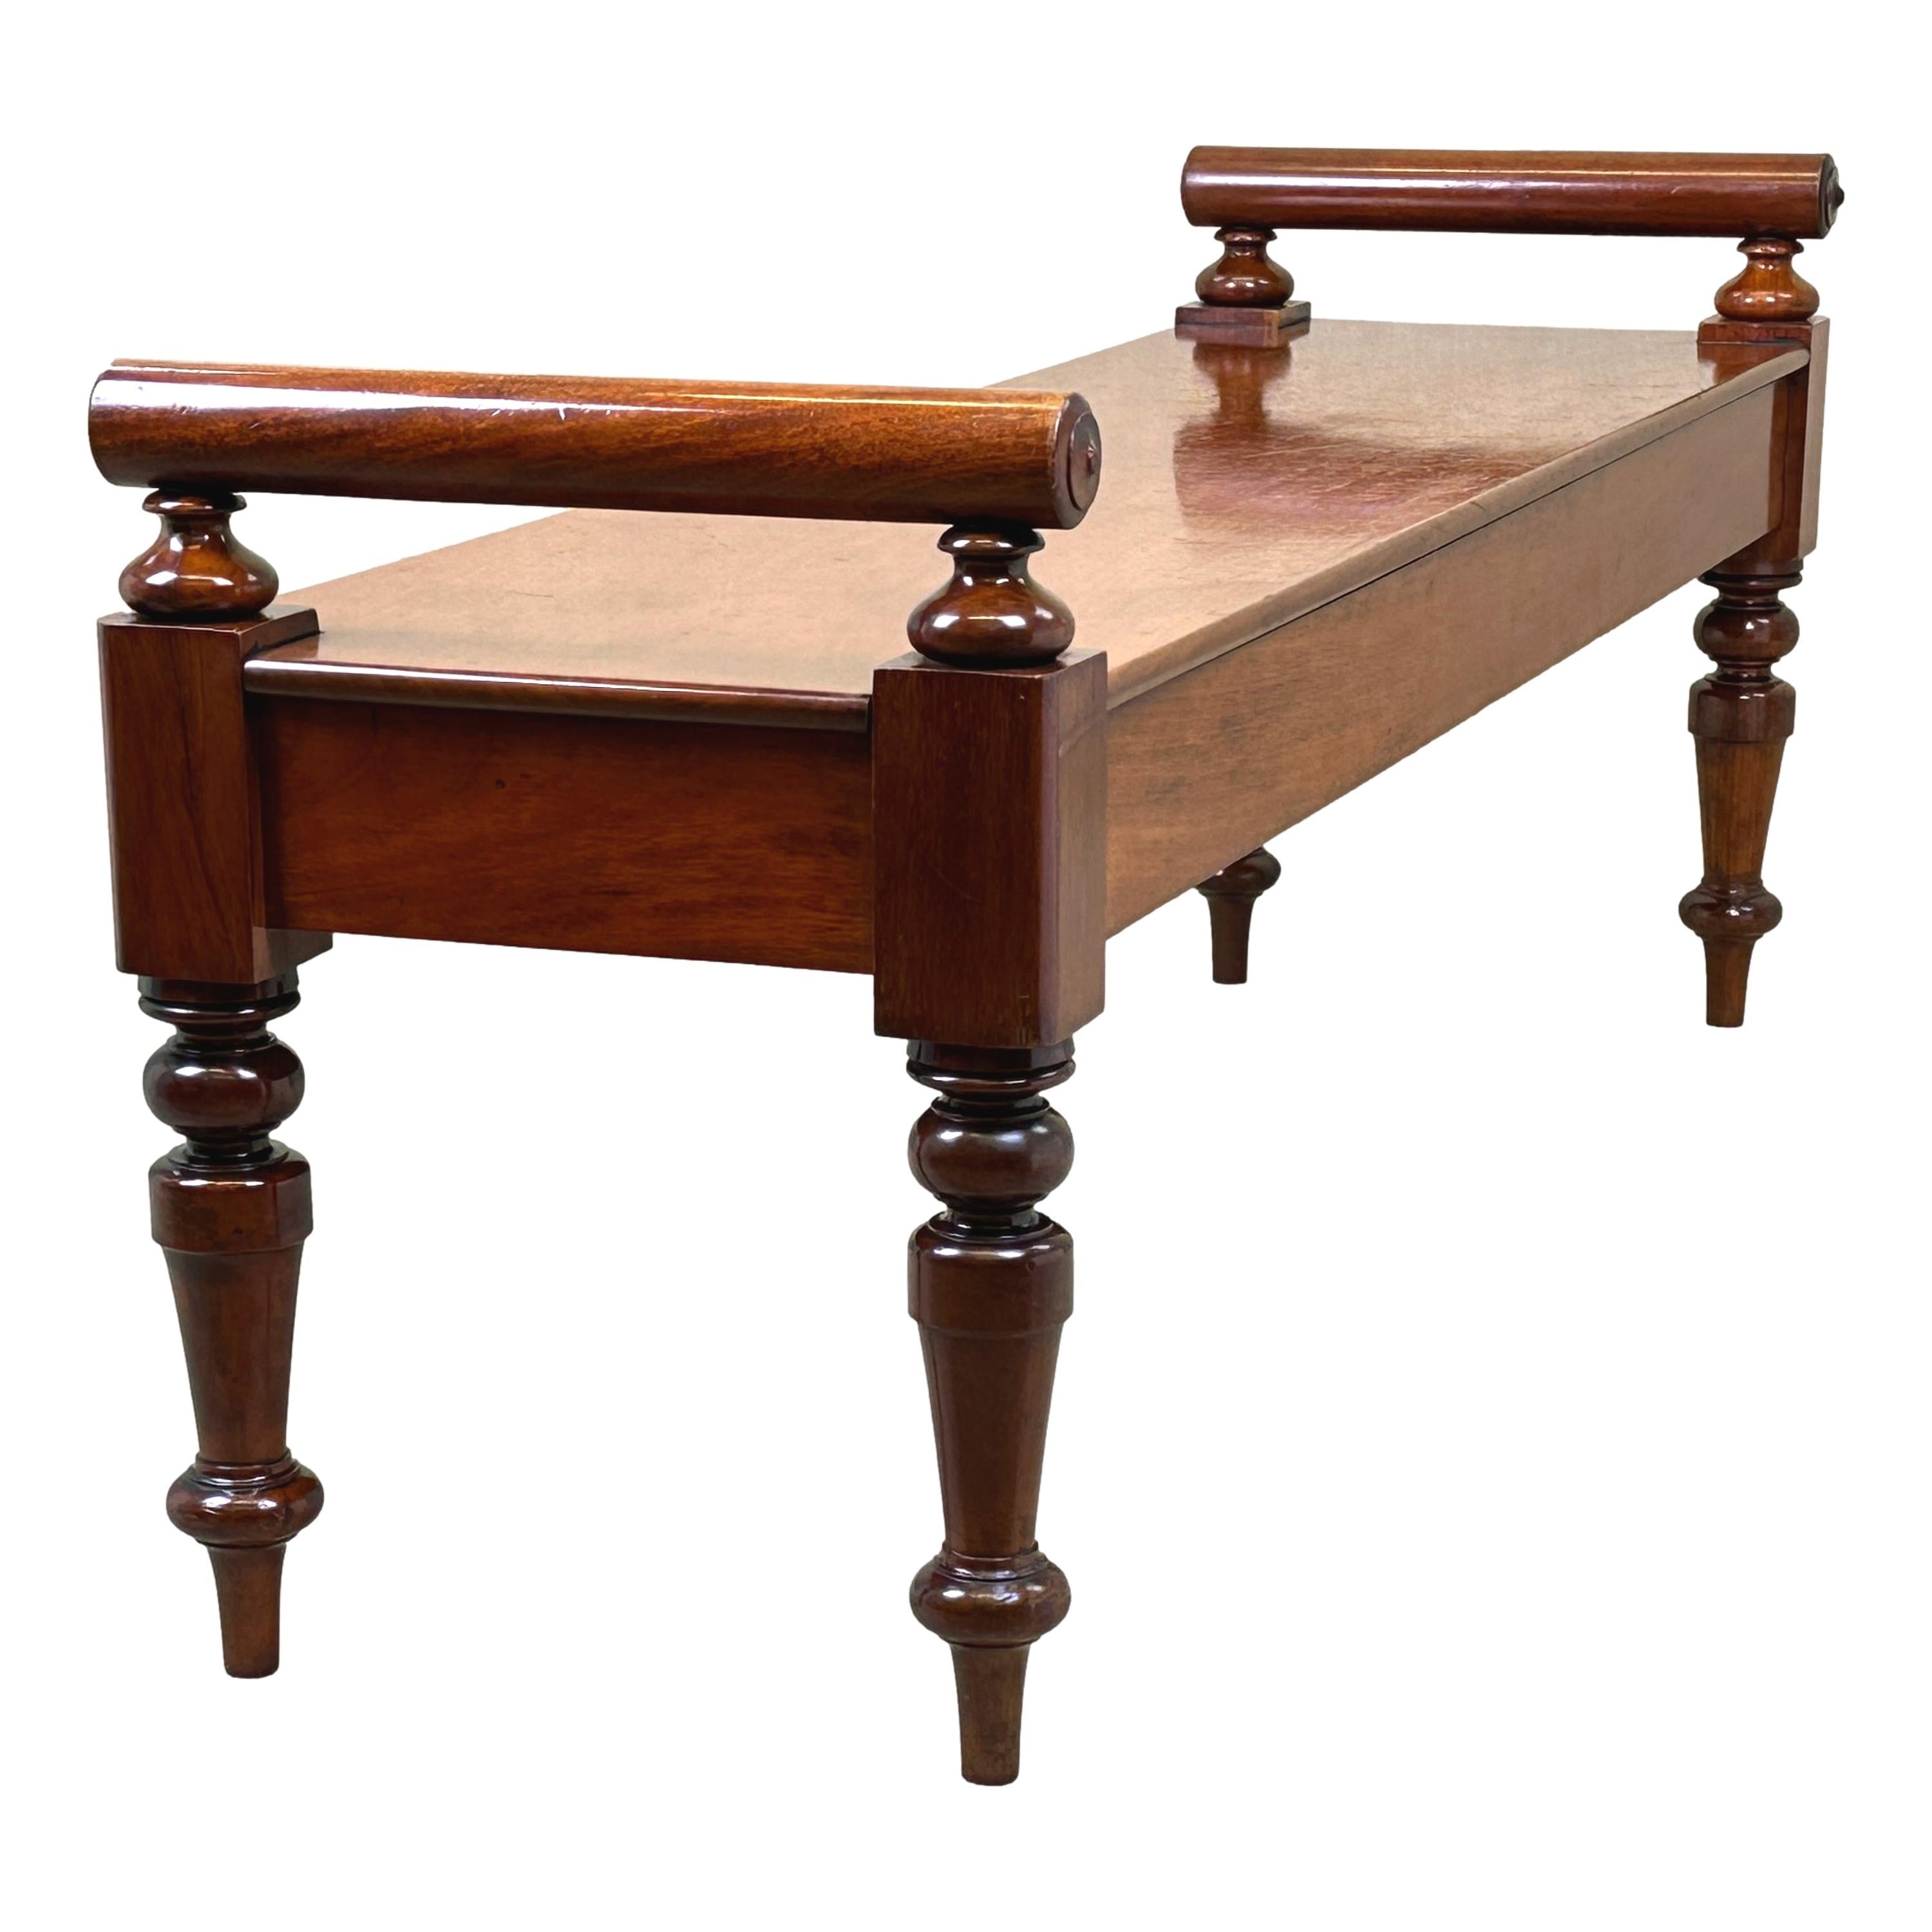 A very good quality, mid 19th century, Victorian Period Mahogany window seat hall bench, of unusually large proportions, having superbly figured rectangular top with elegant raised turned rolls to each end, raised on turned tapering legs.


These